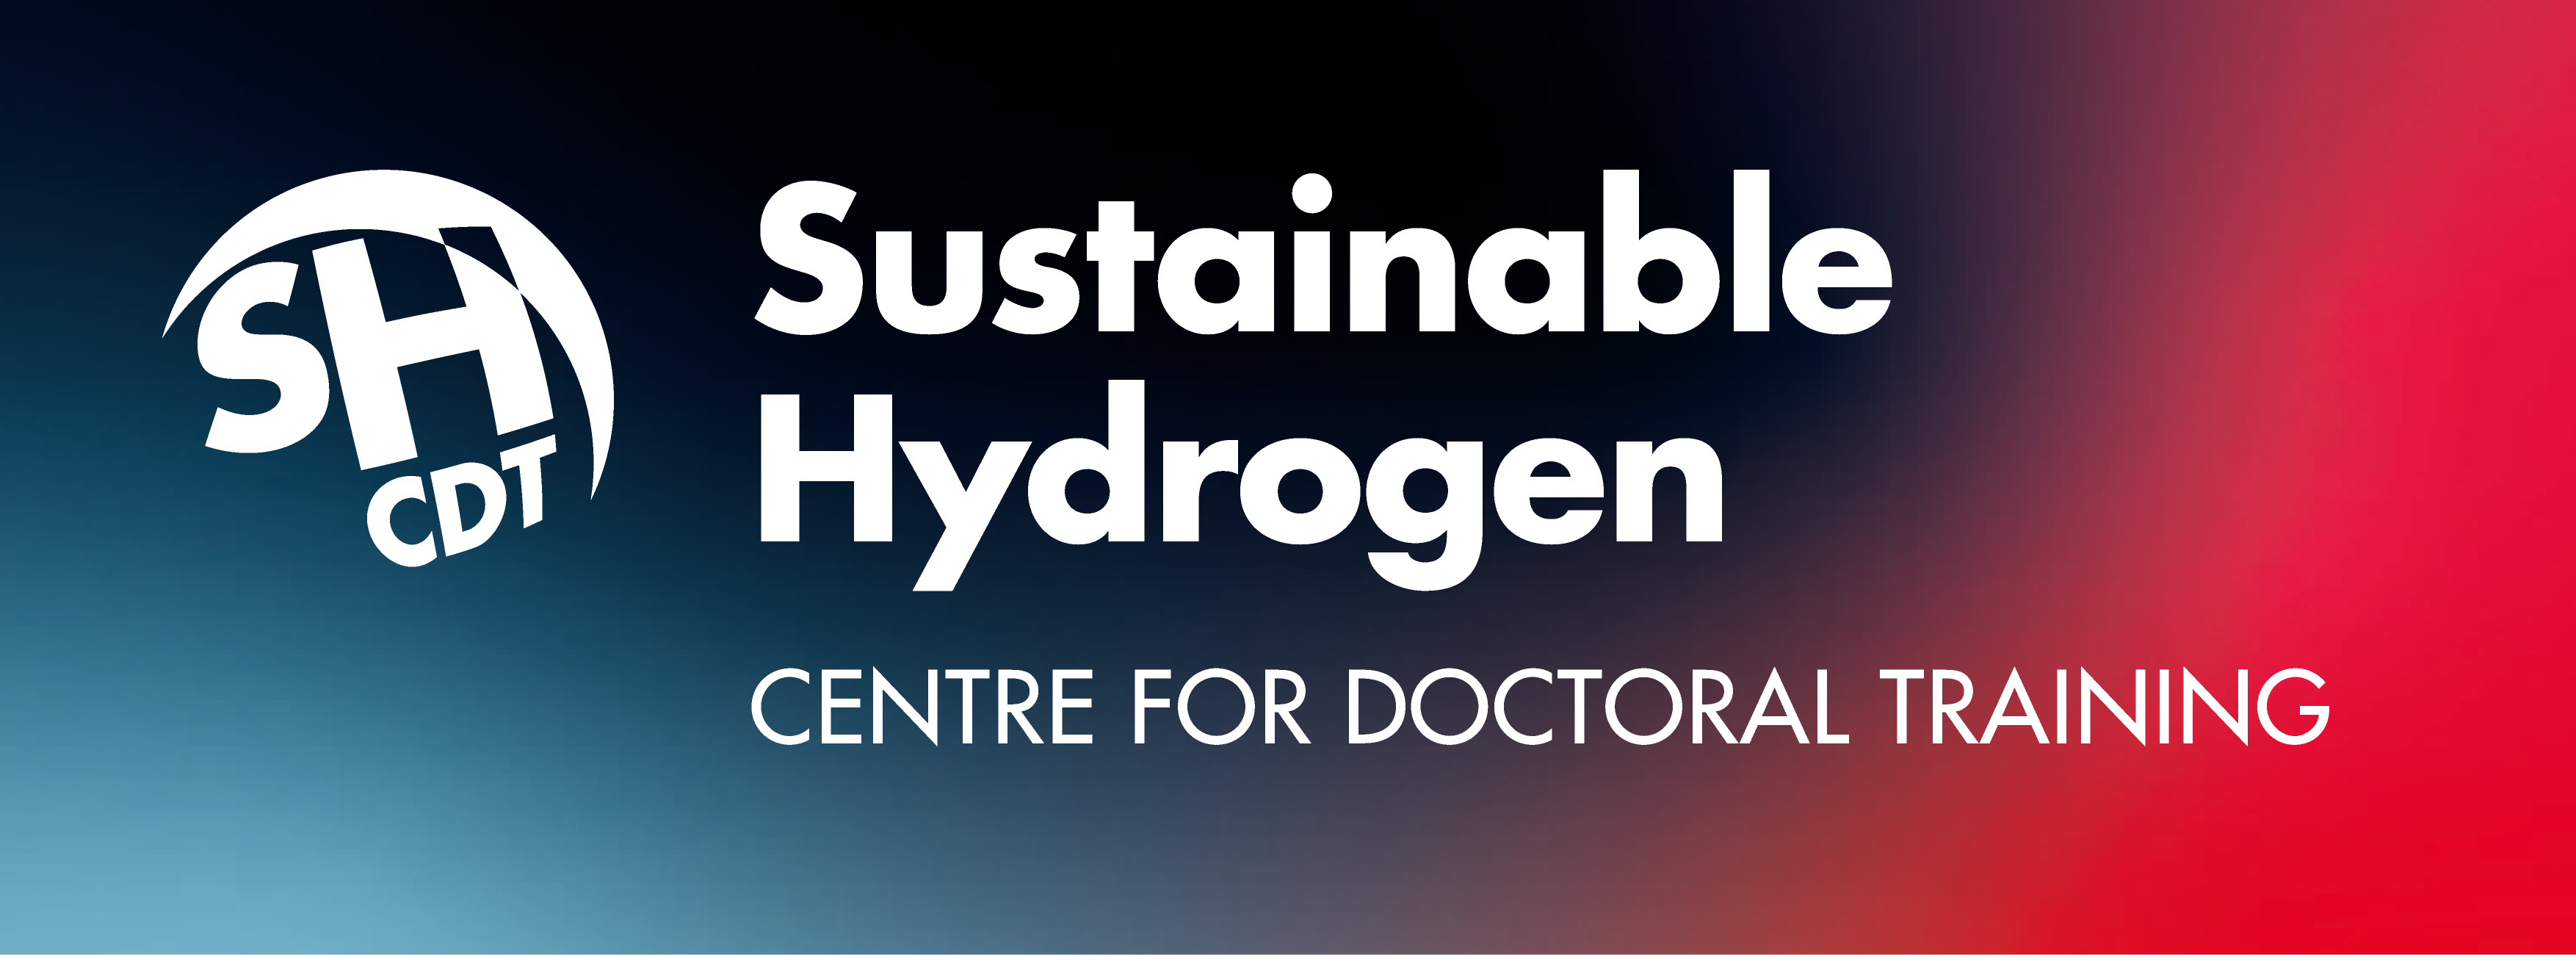 Sustainable Hydrogen Centre for Doctoral Training